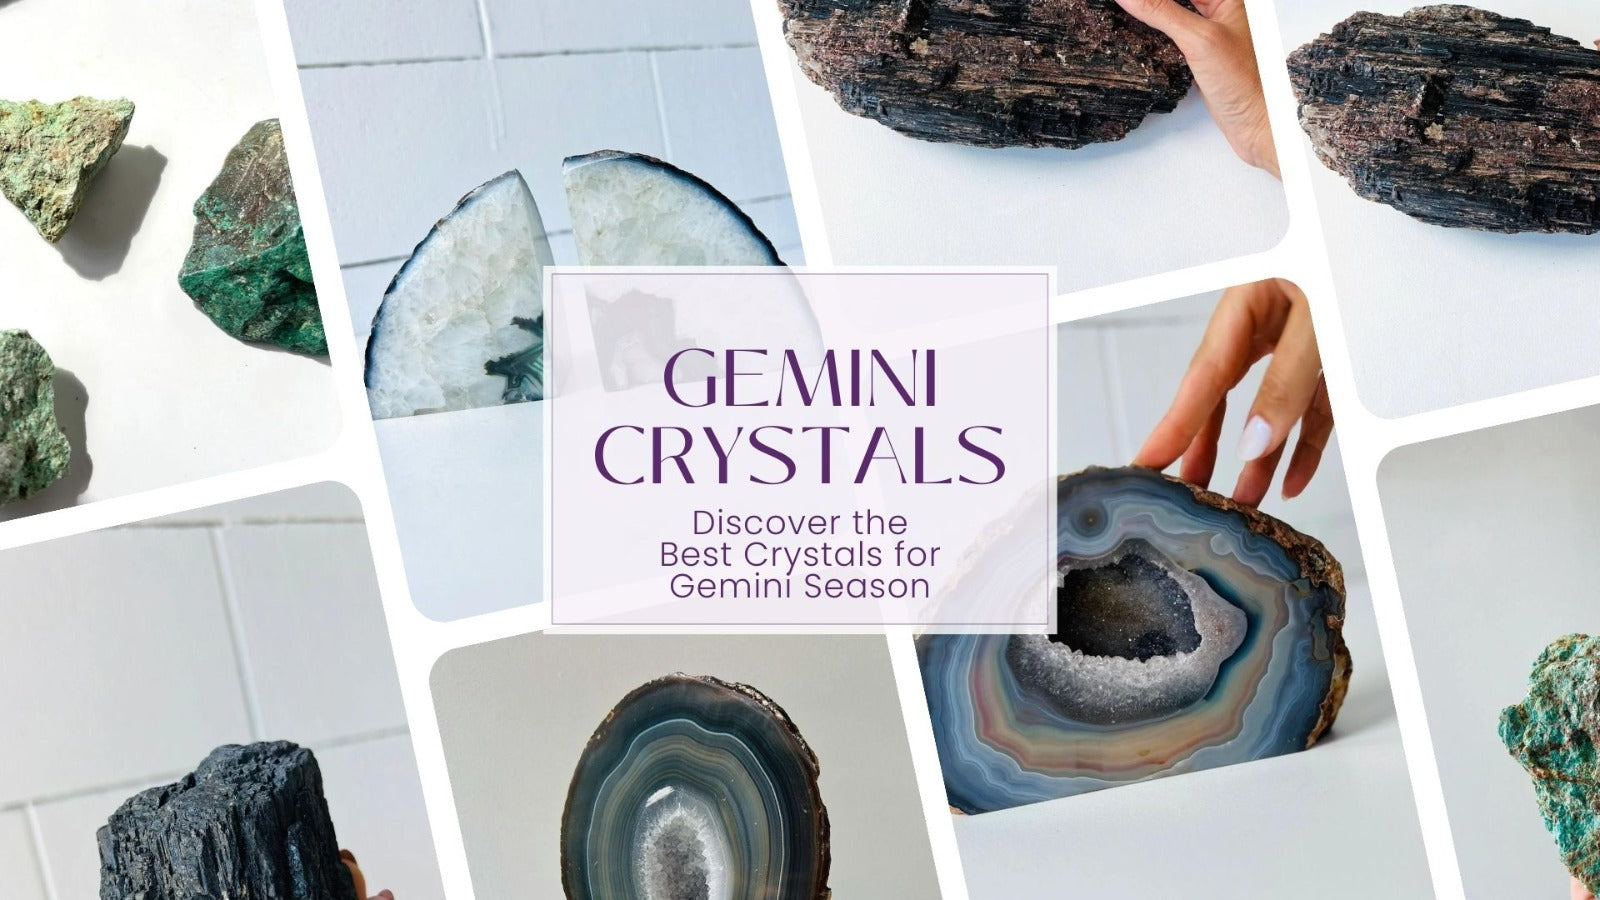 ✨ Gemini Season: Creating a Connection with Gemini Crystals! ✨